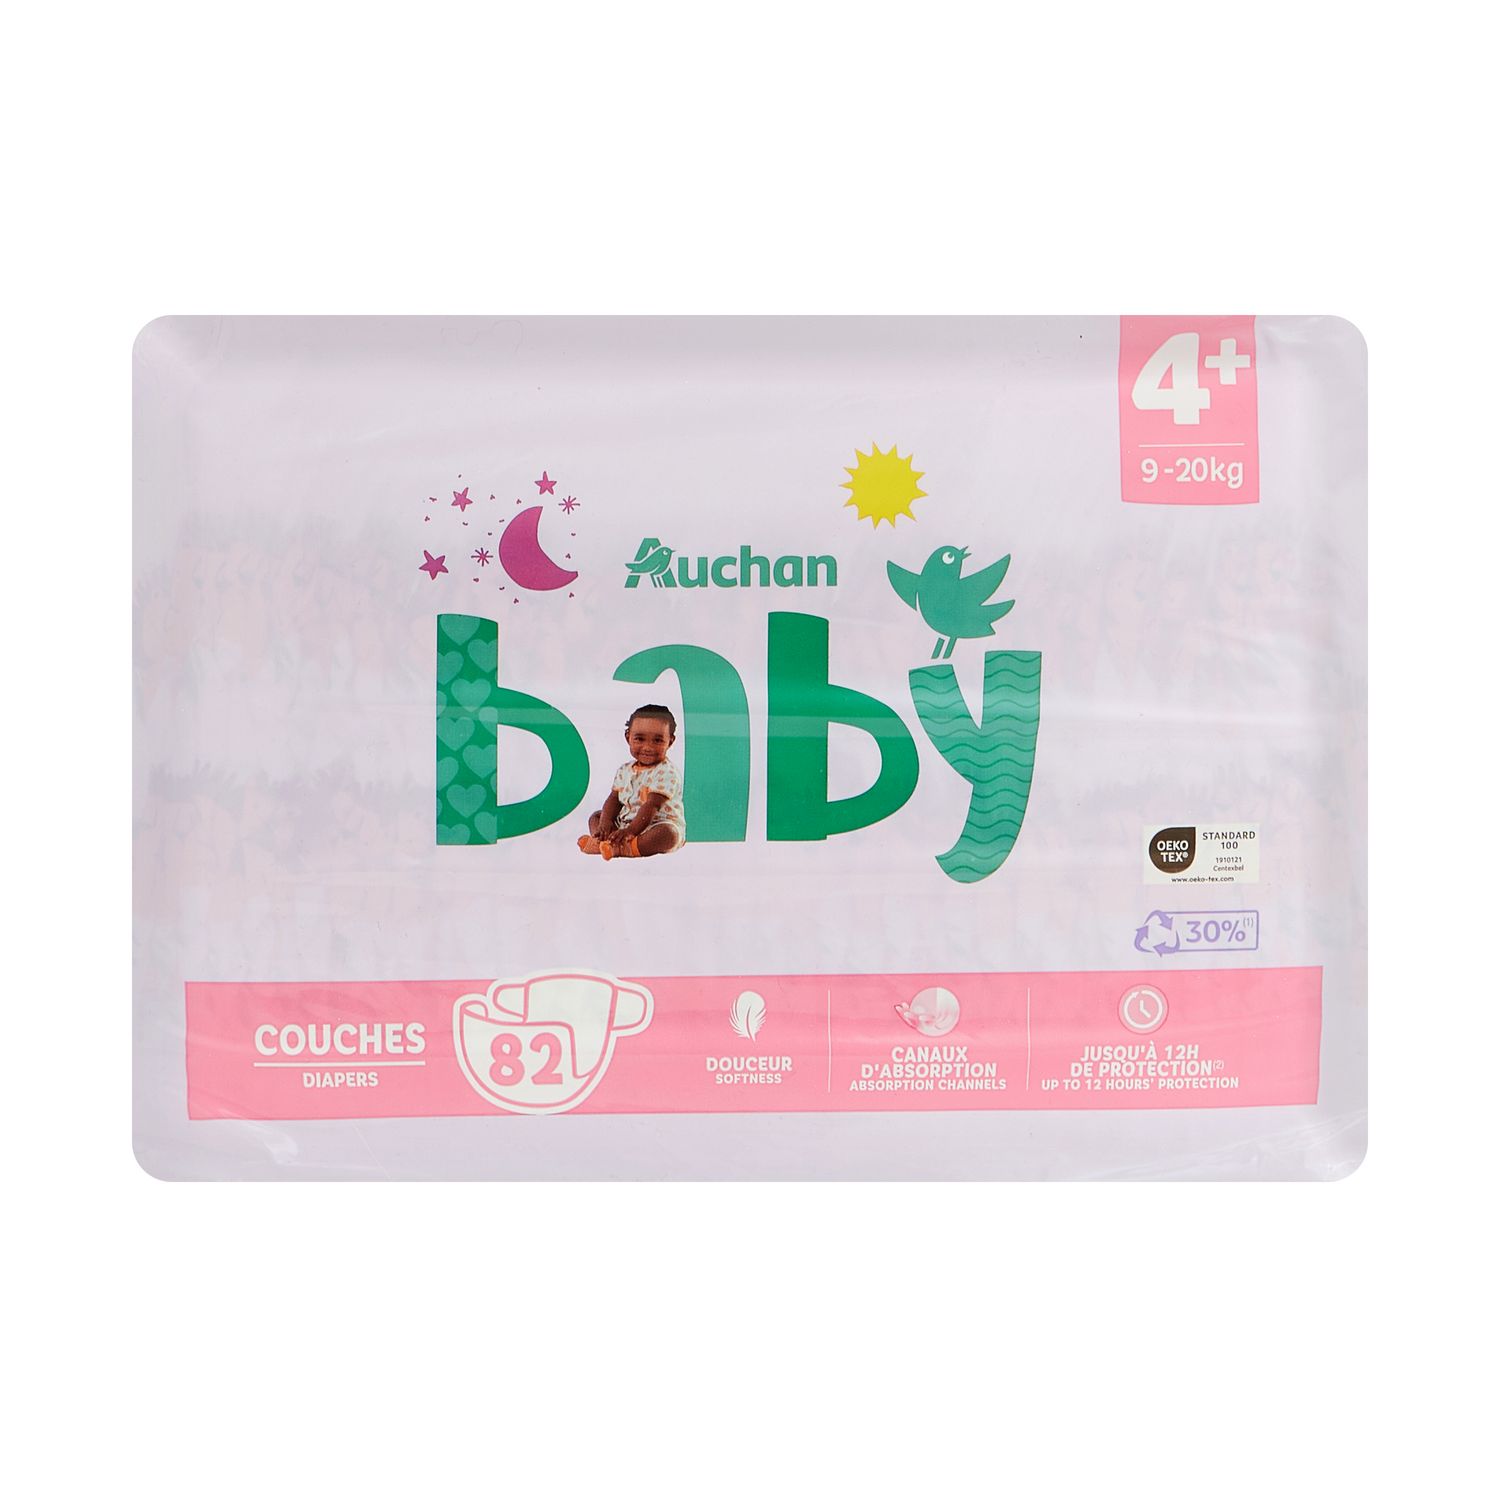 AUCHAN BABY Couches taille 4+ (9-20kg) 82 couches pas cher 